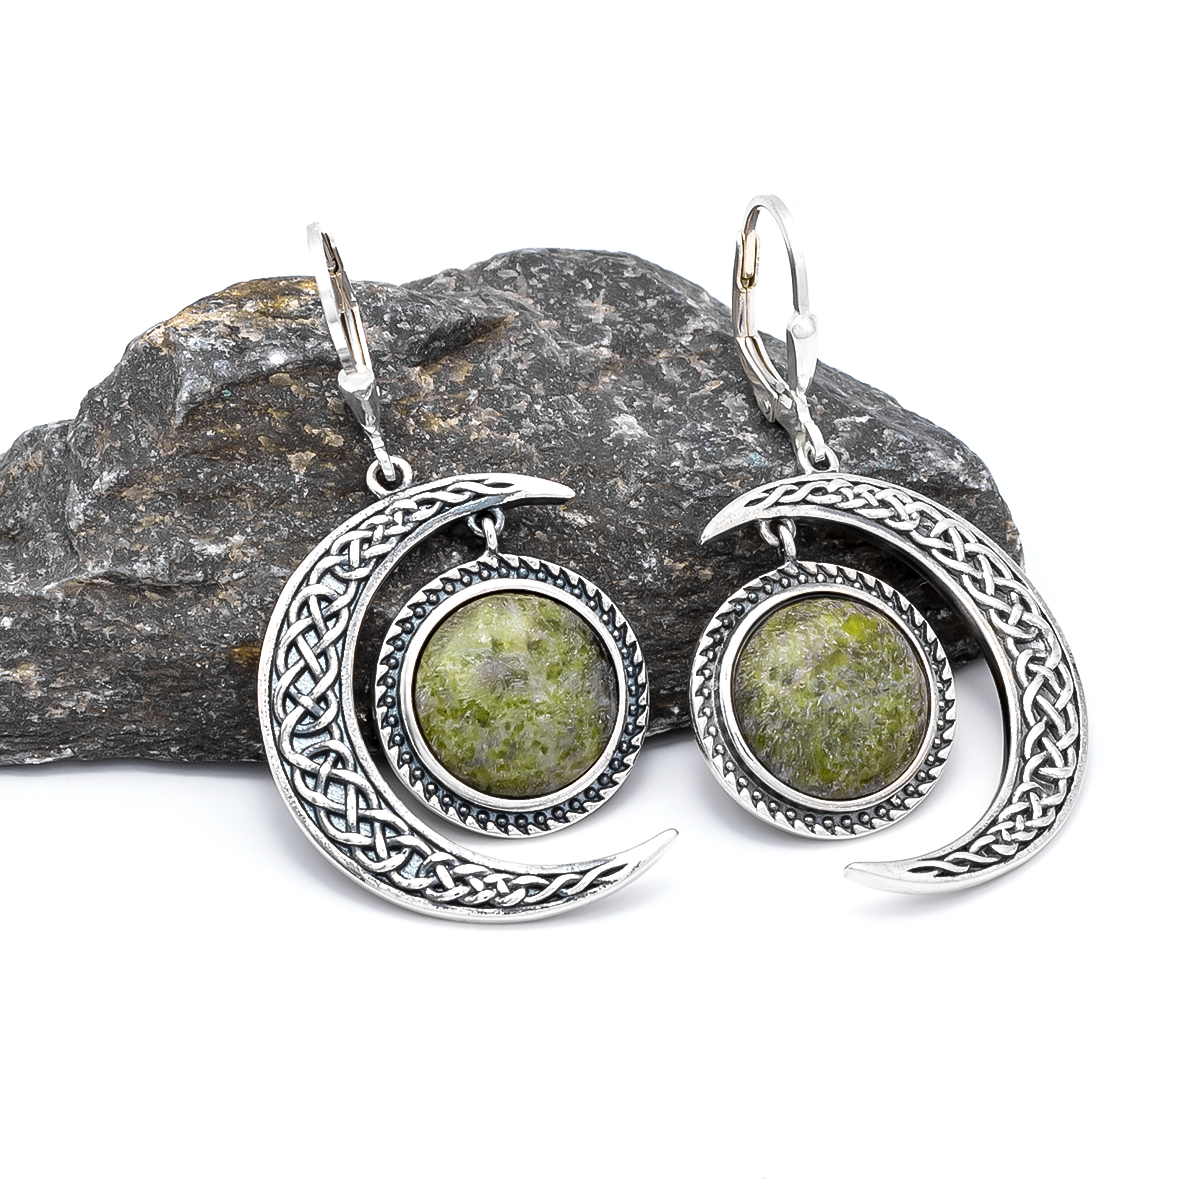 Connemara Marble Celtic Sun and Moon Earrings in Sterling Silver